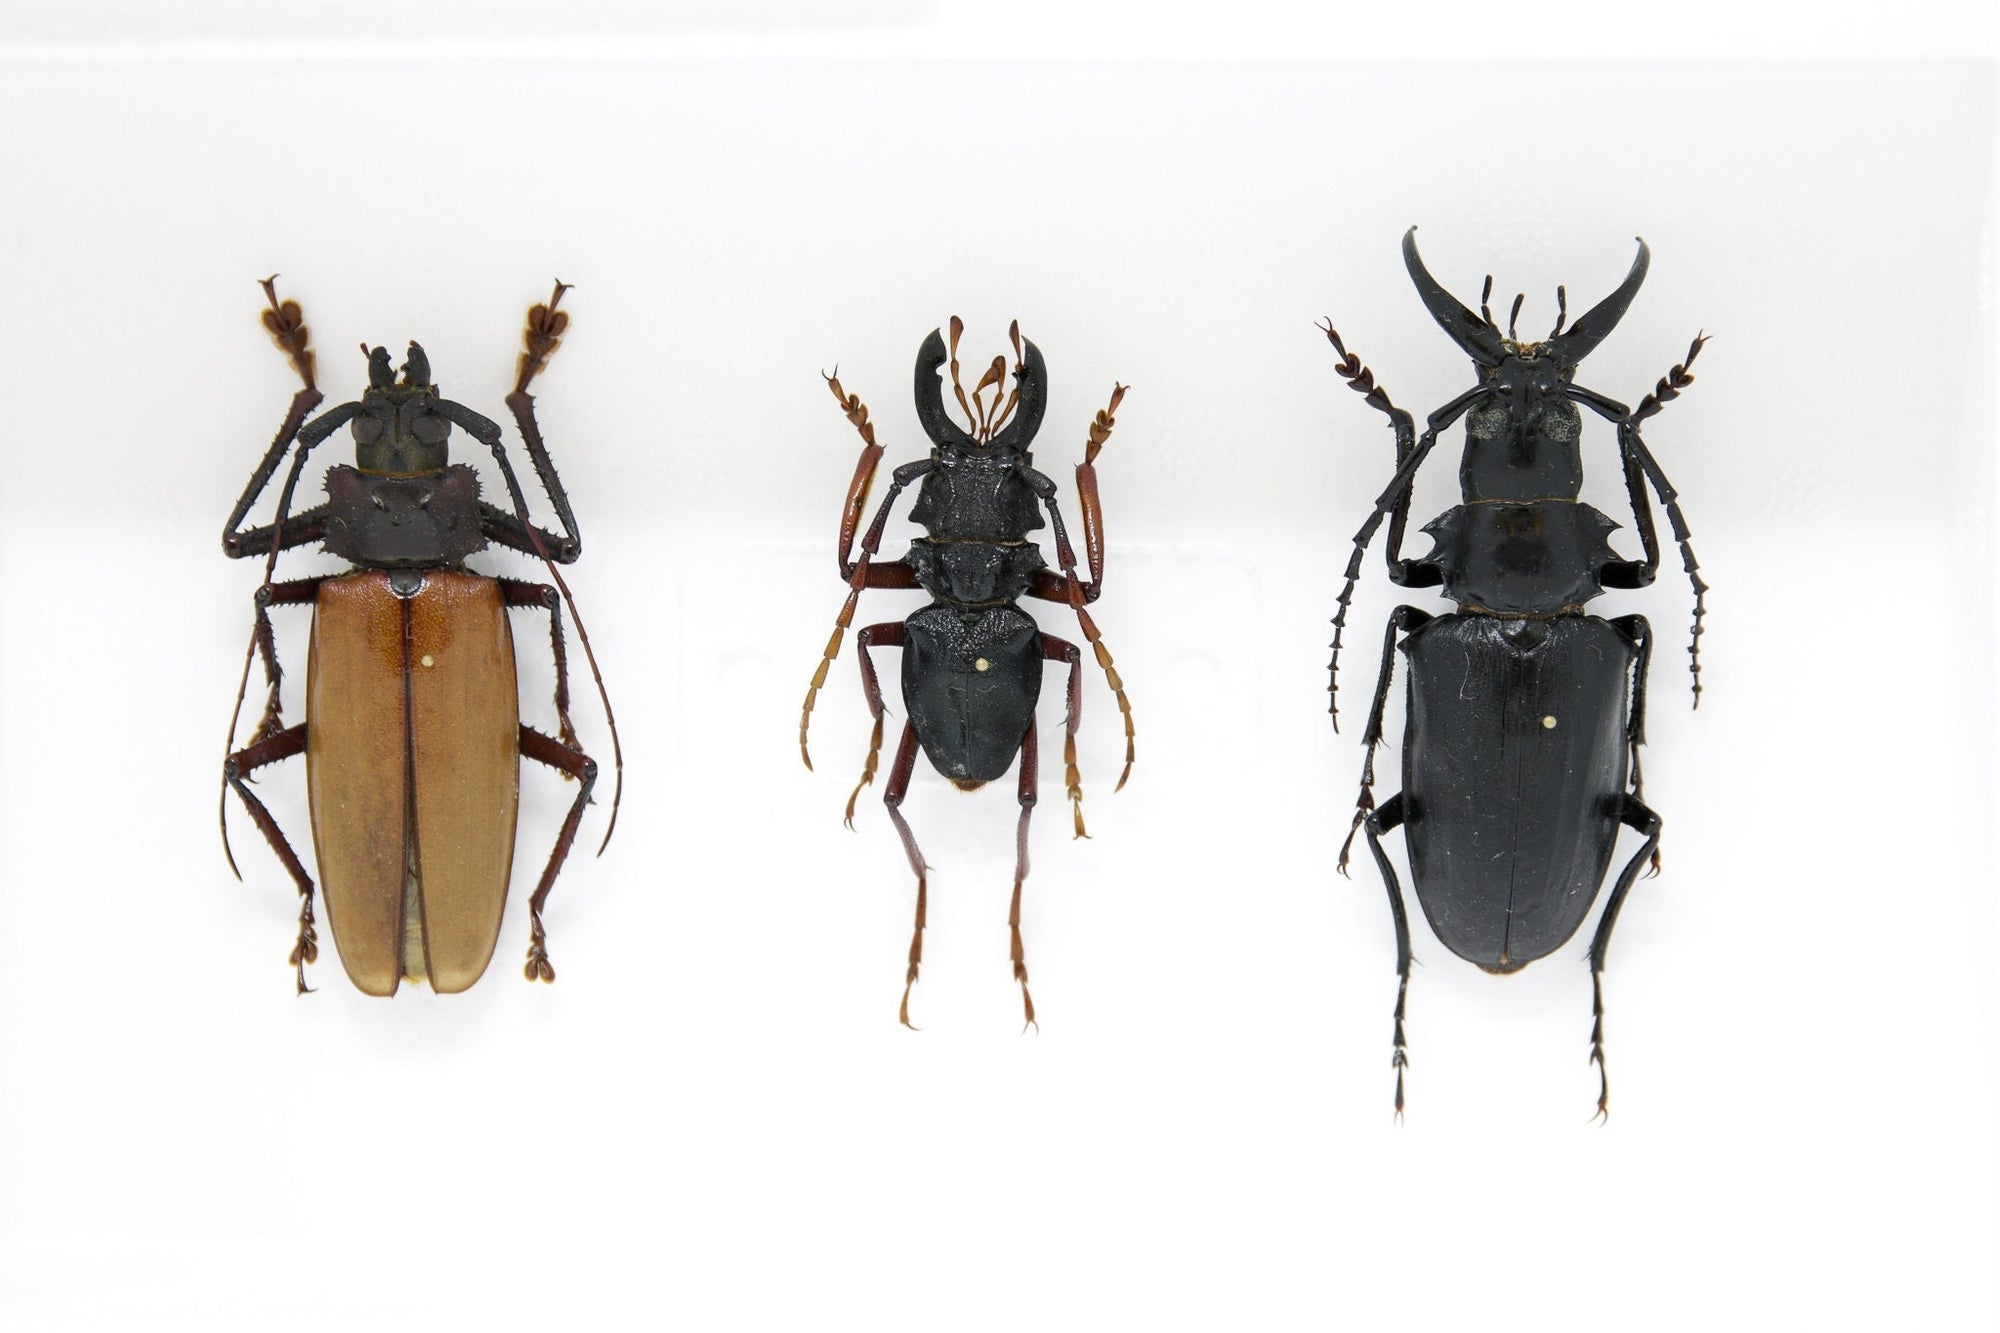 A Collection of Real Longhorned Beetles (Coleoptera) Inc. Scientific Collection Data, A1 Quality, Entomology, Real Insect Specimens SKU#39